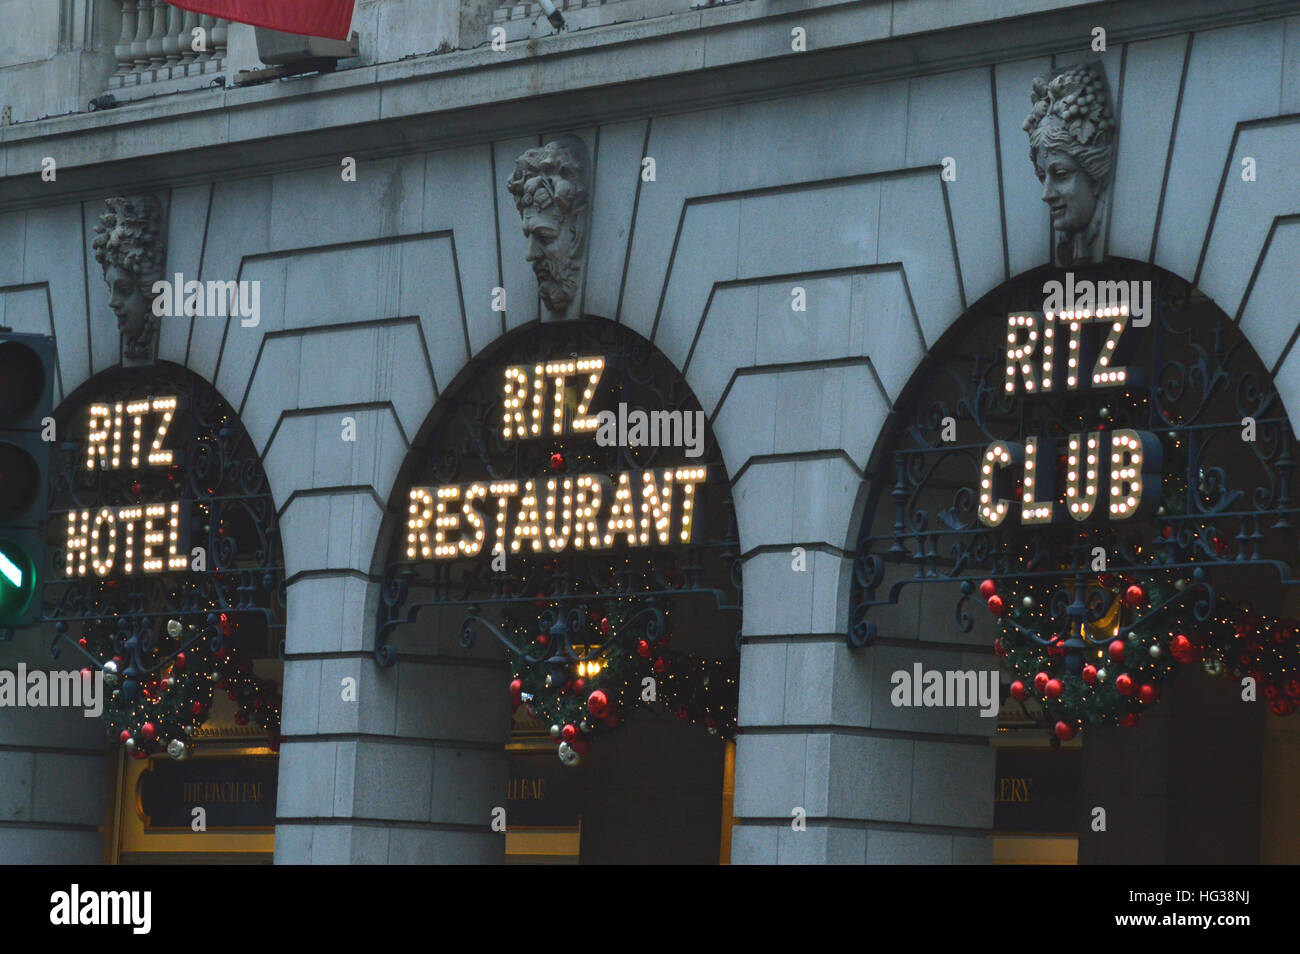 Exterior of the Ritz hotel in London Stock Photo